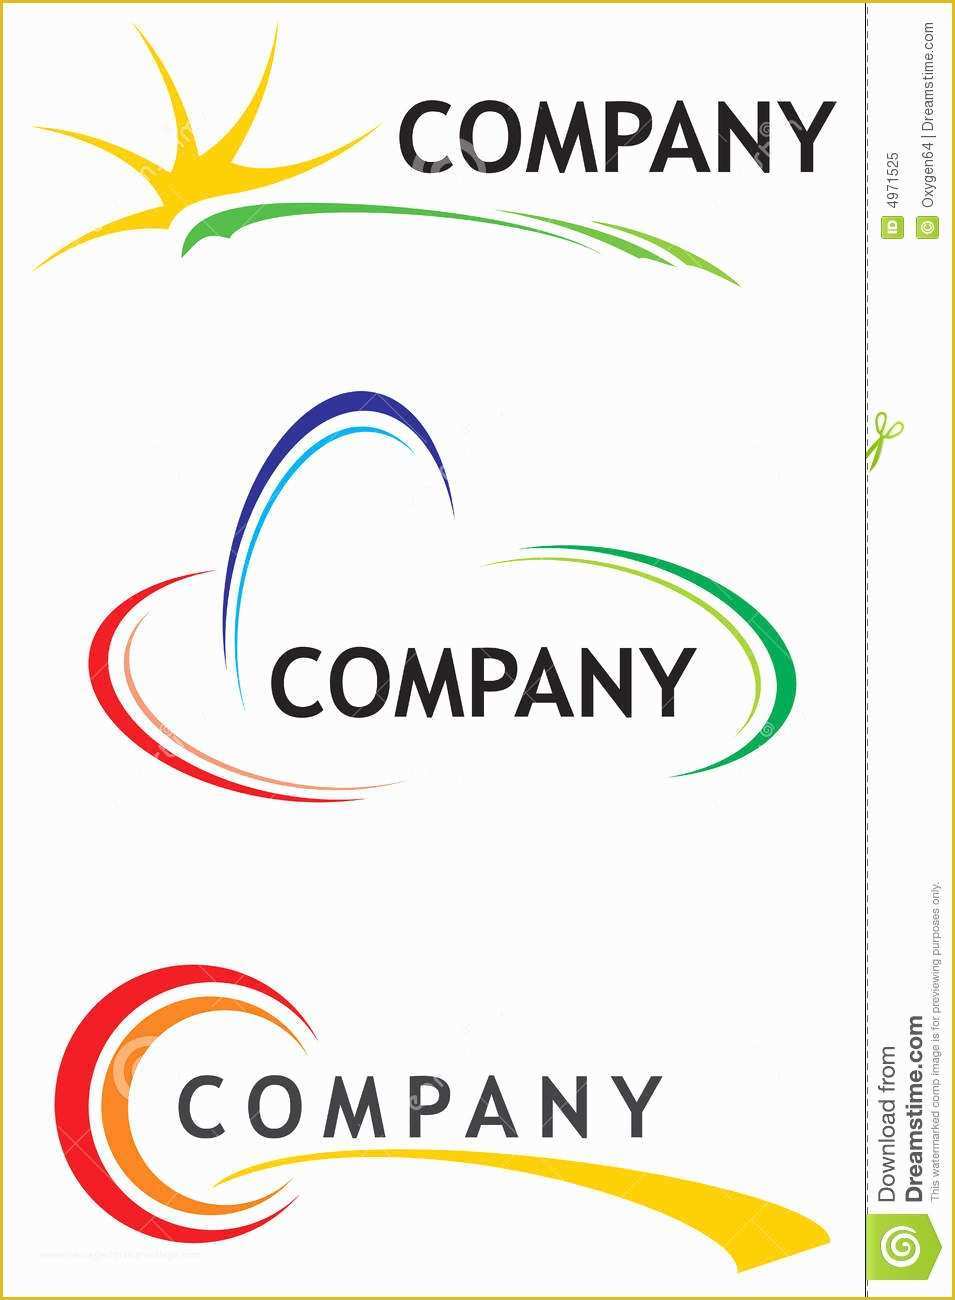 Free Sign Design Templates Of Corporate Logo Templates Stock Vector Image Of Icon